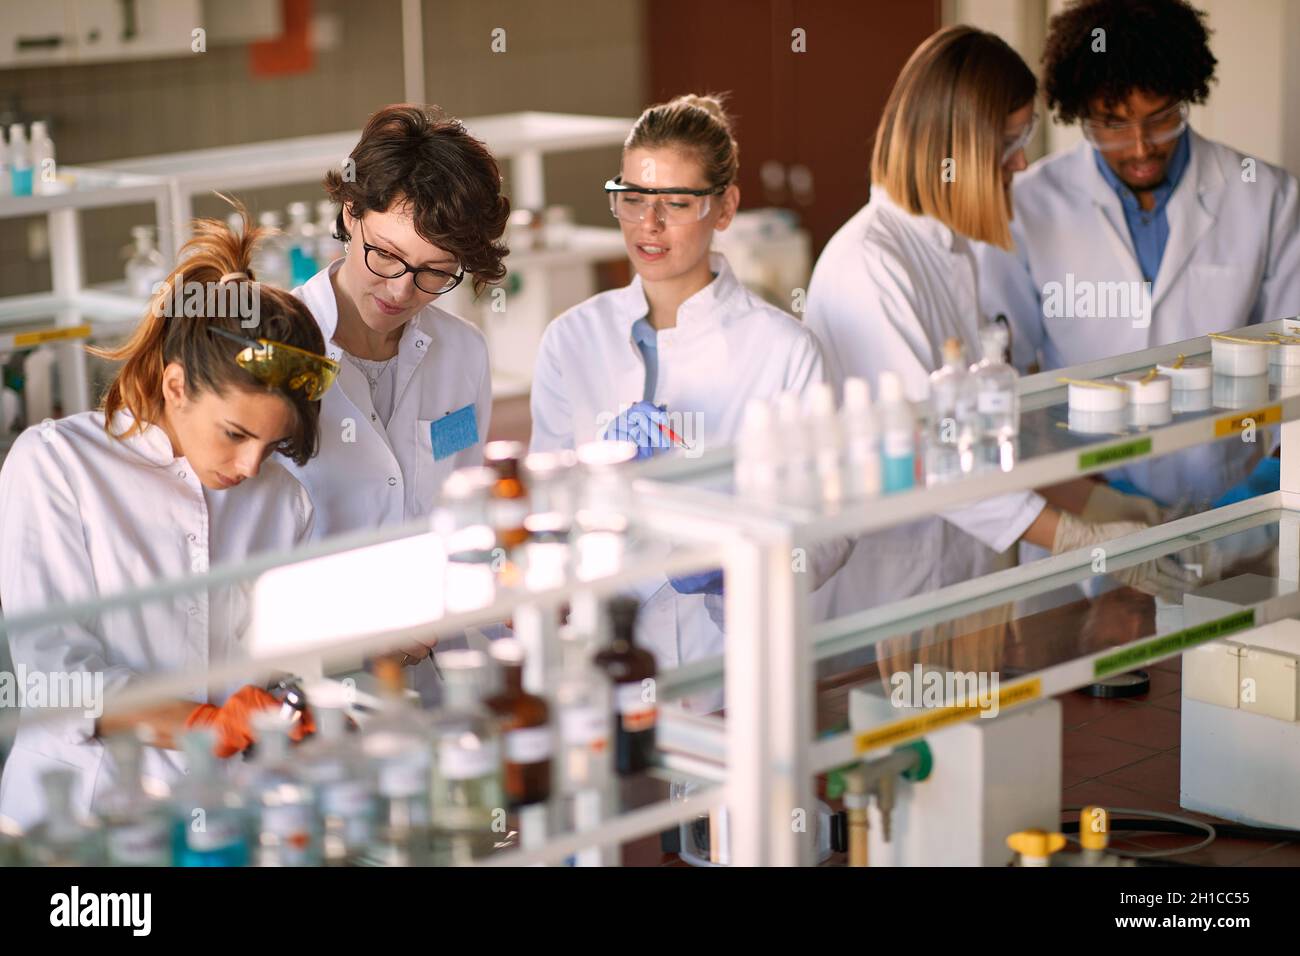 Young students enjoy working in a sterile laboratory environment. Science, chemistry, lab, people Stock Photo